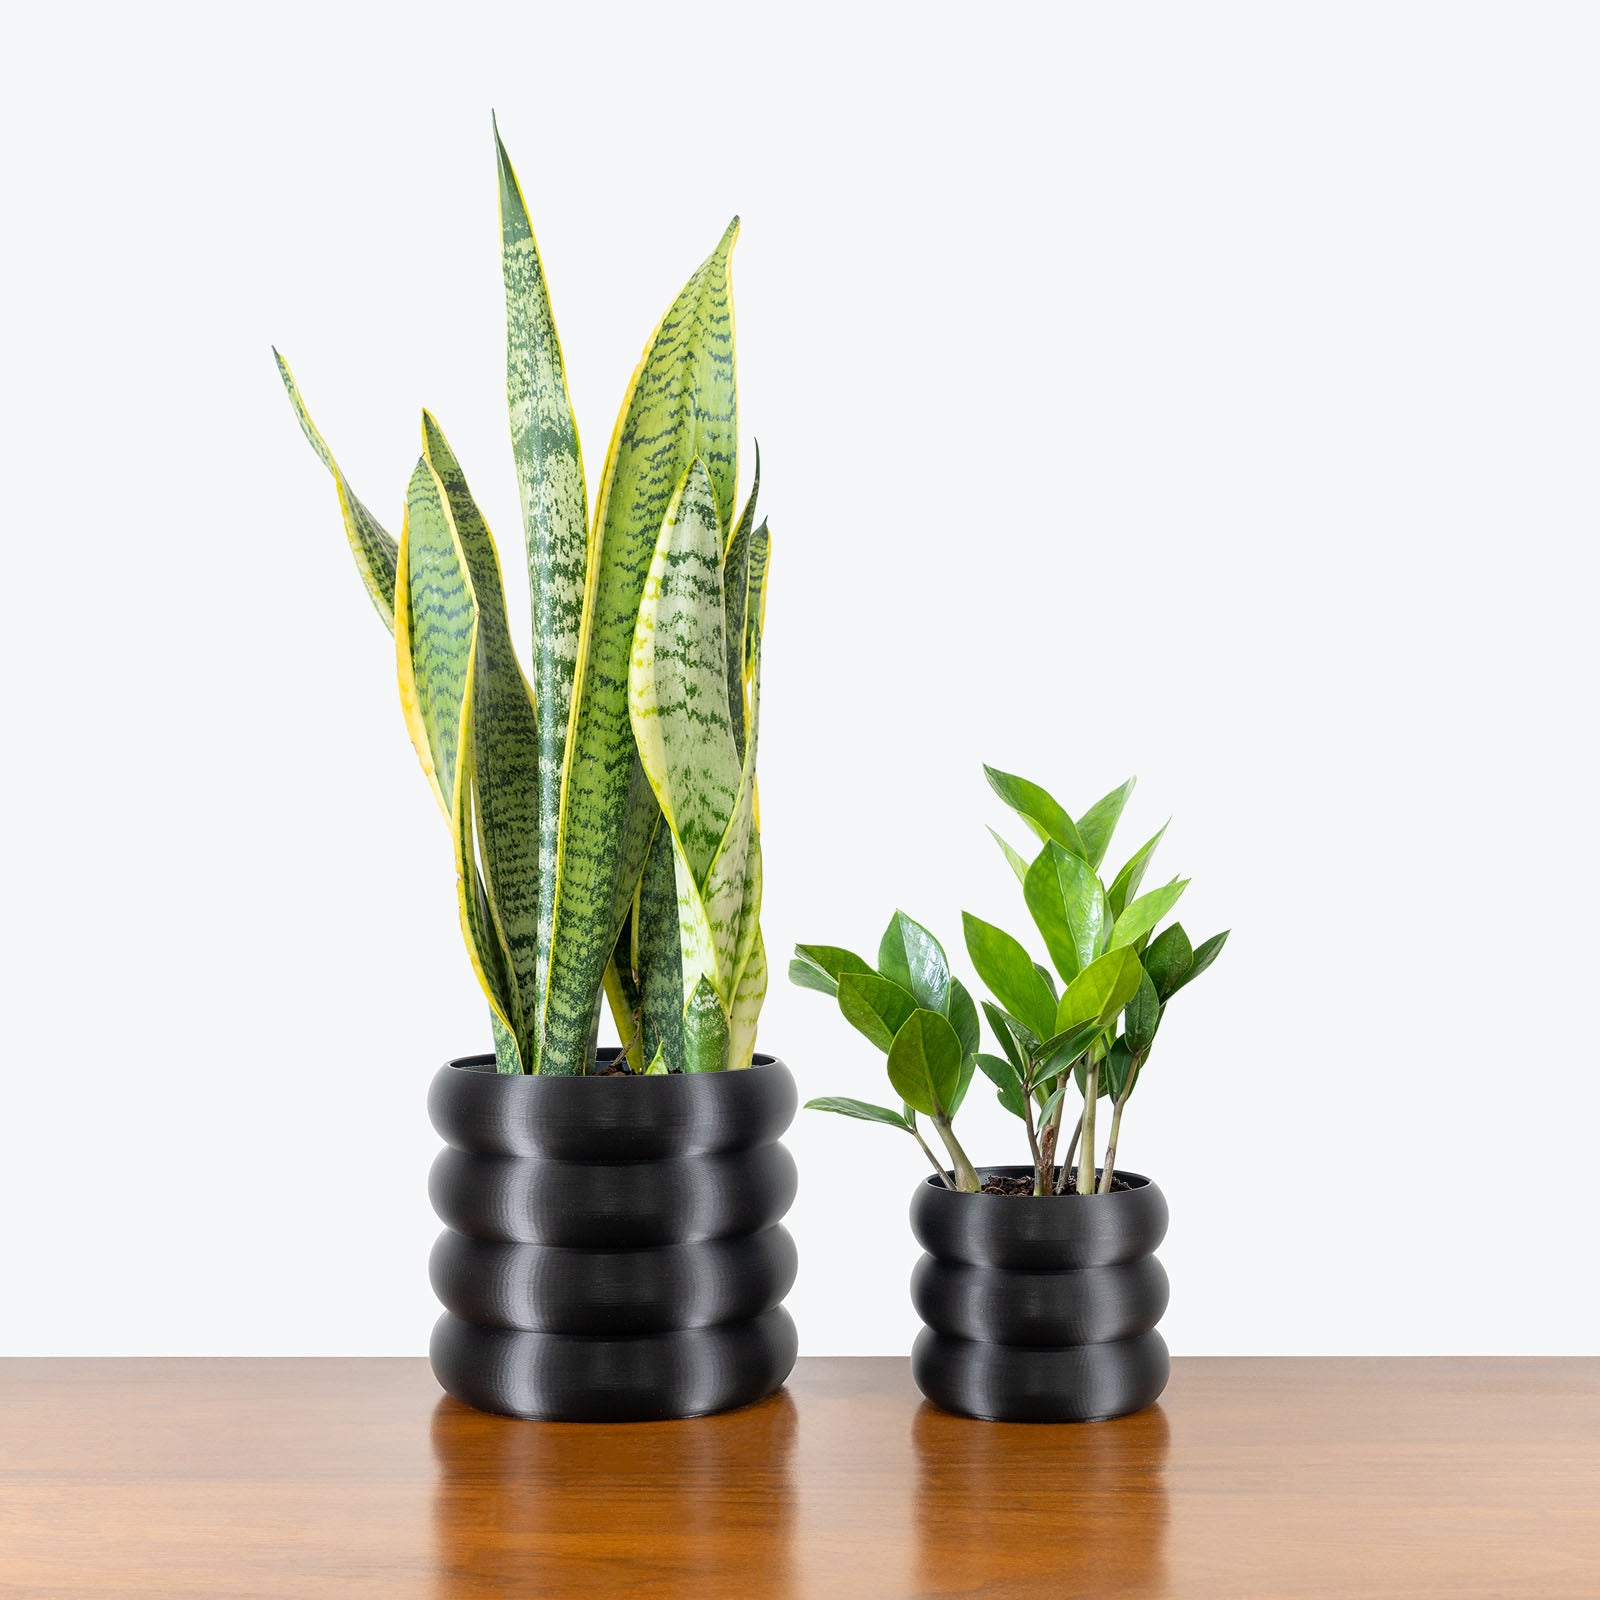 Low Light Duo in 3D Printed Eco Friendly Donut Planter - House Plants Delivery Toronto - JOMO Studio #planter_donut planter